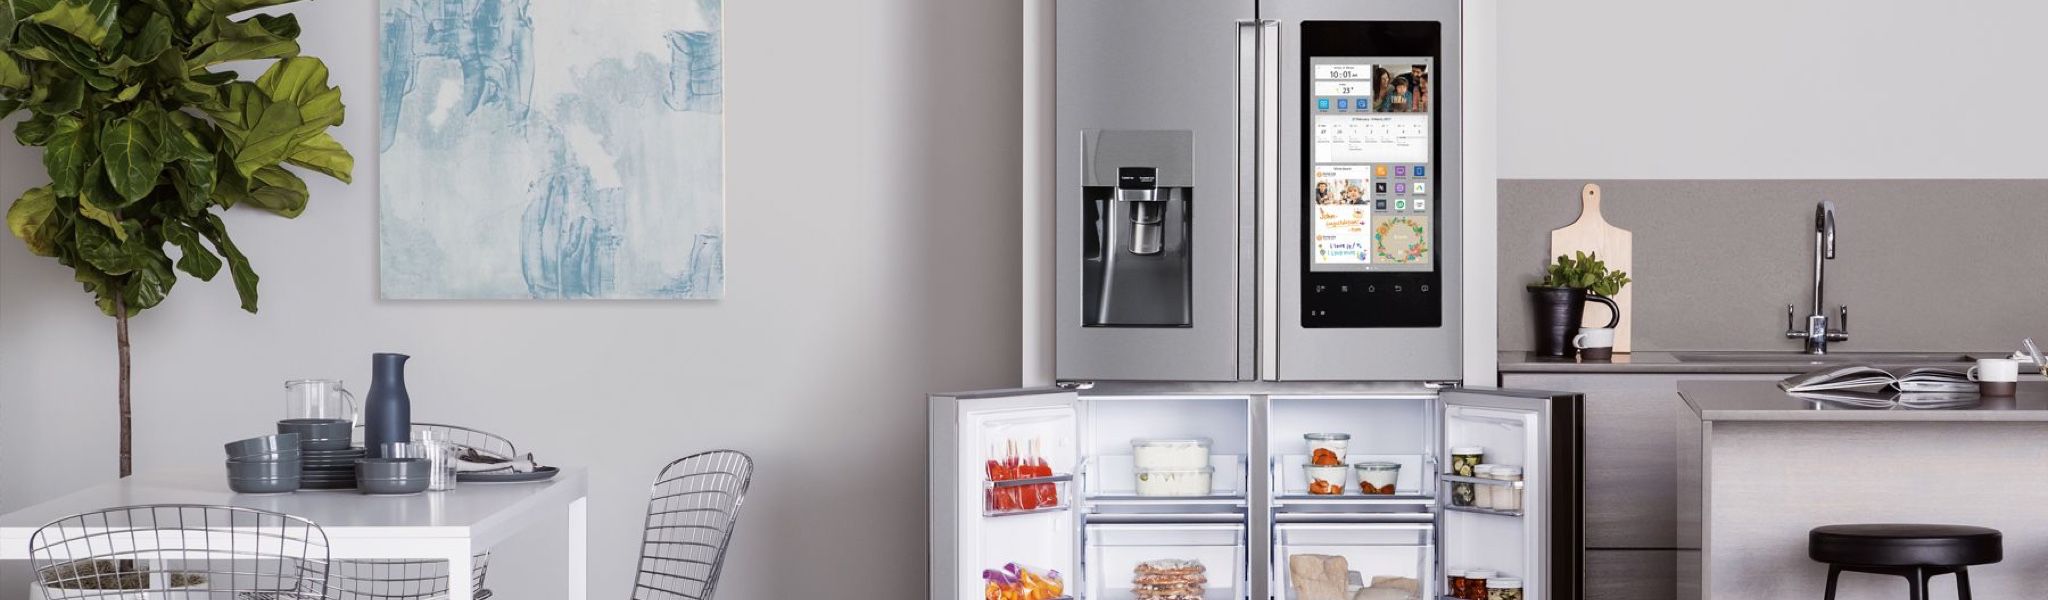 How to buy the best fridge freezer, Buyers guides